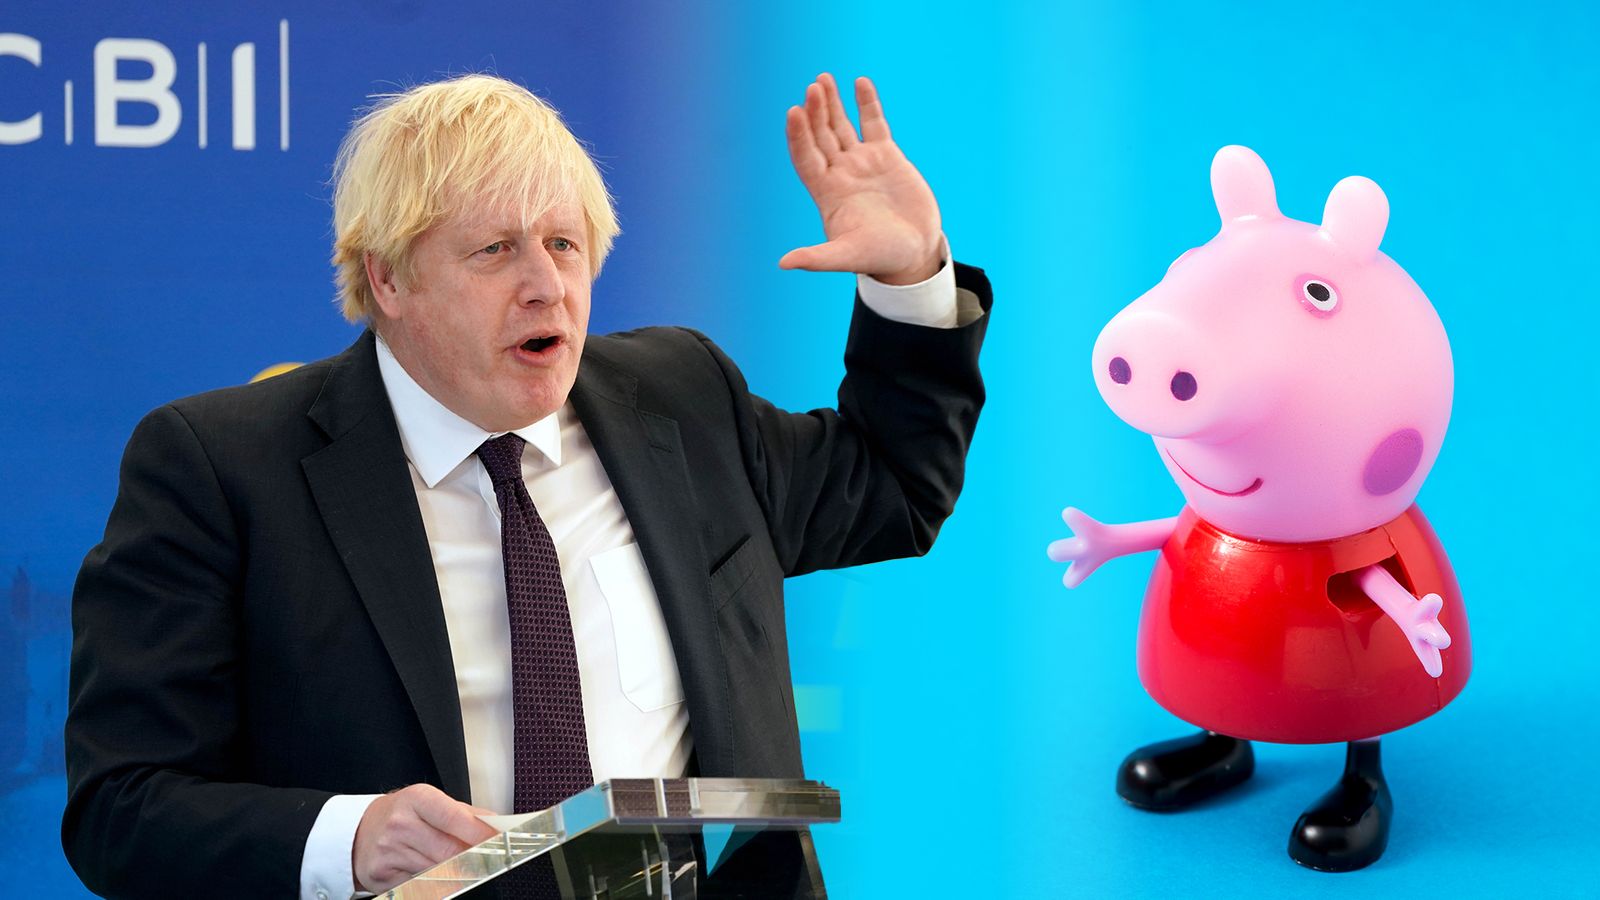 Boris Johnson speech criticised by City experts over Peppa Pig reference - as it was bought by US firm amid Brexit fears